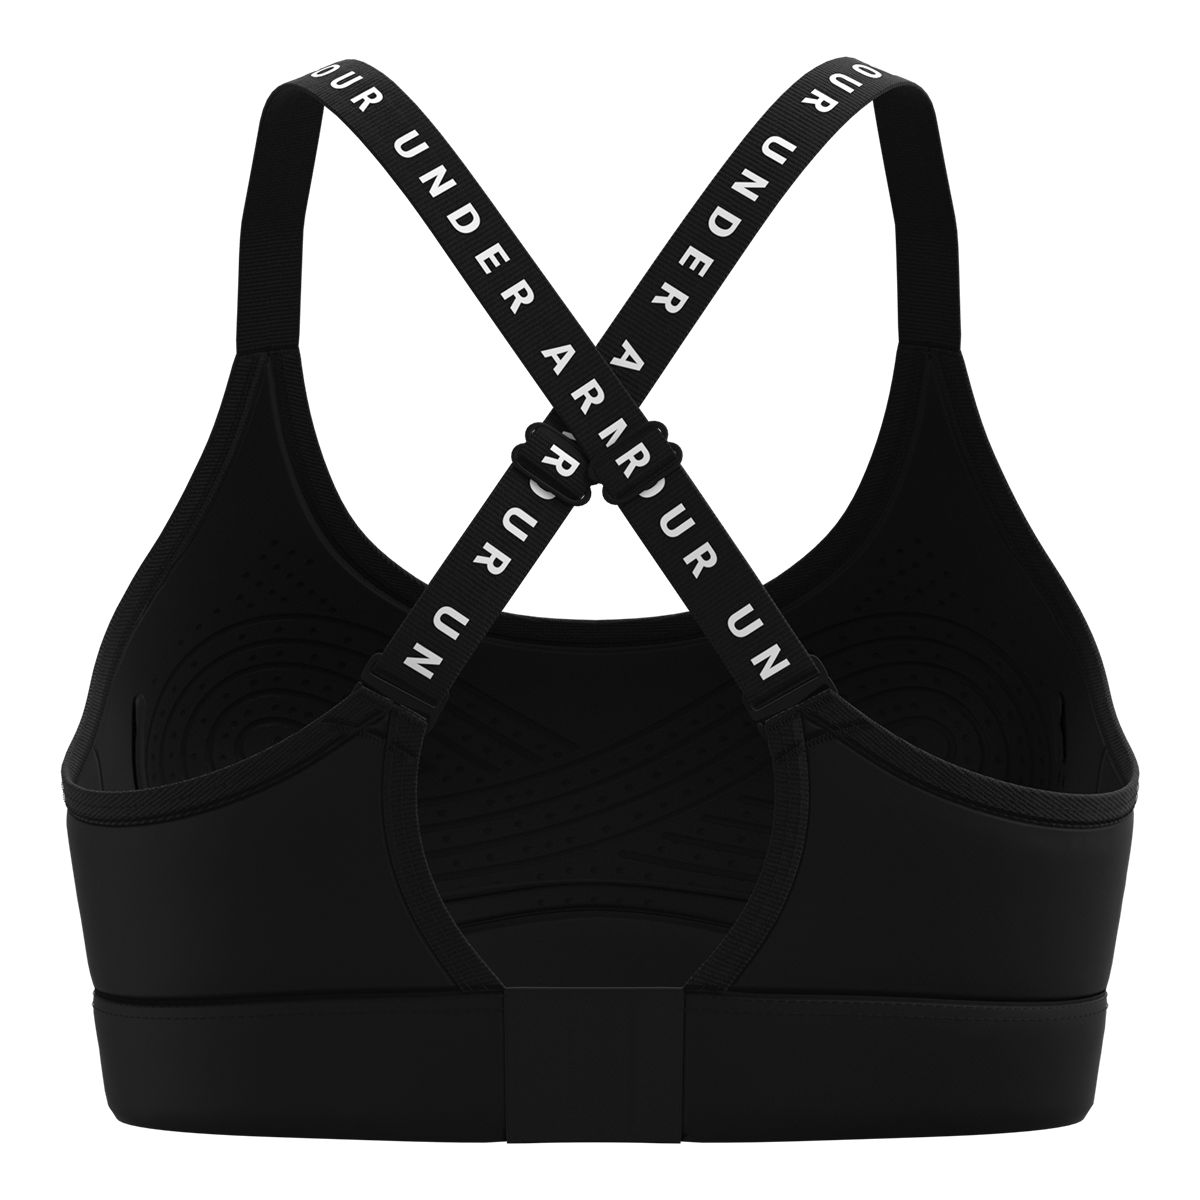 Sports Bra Small UK8/10 Black Seamless Padded by INOC IN NEED OF